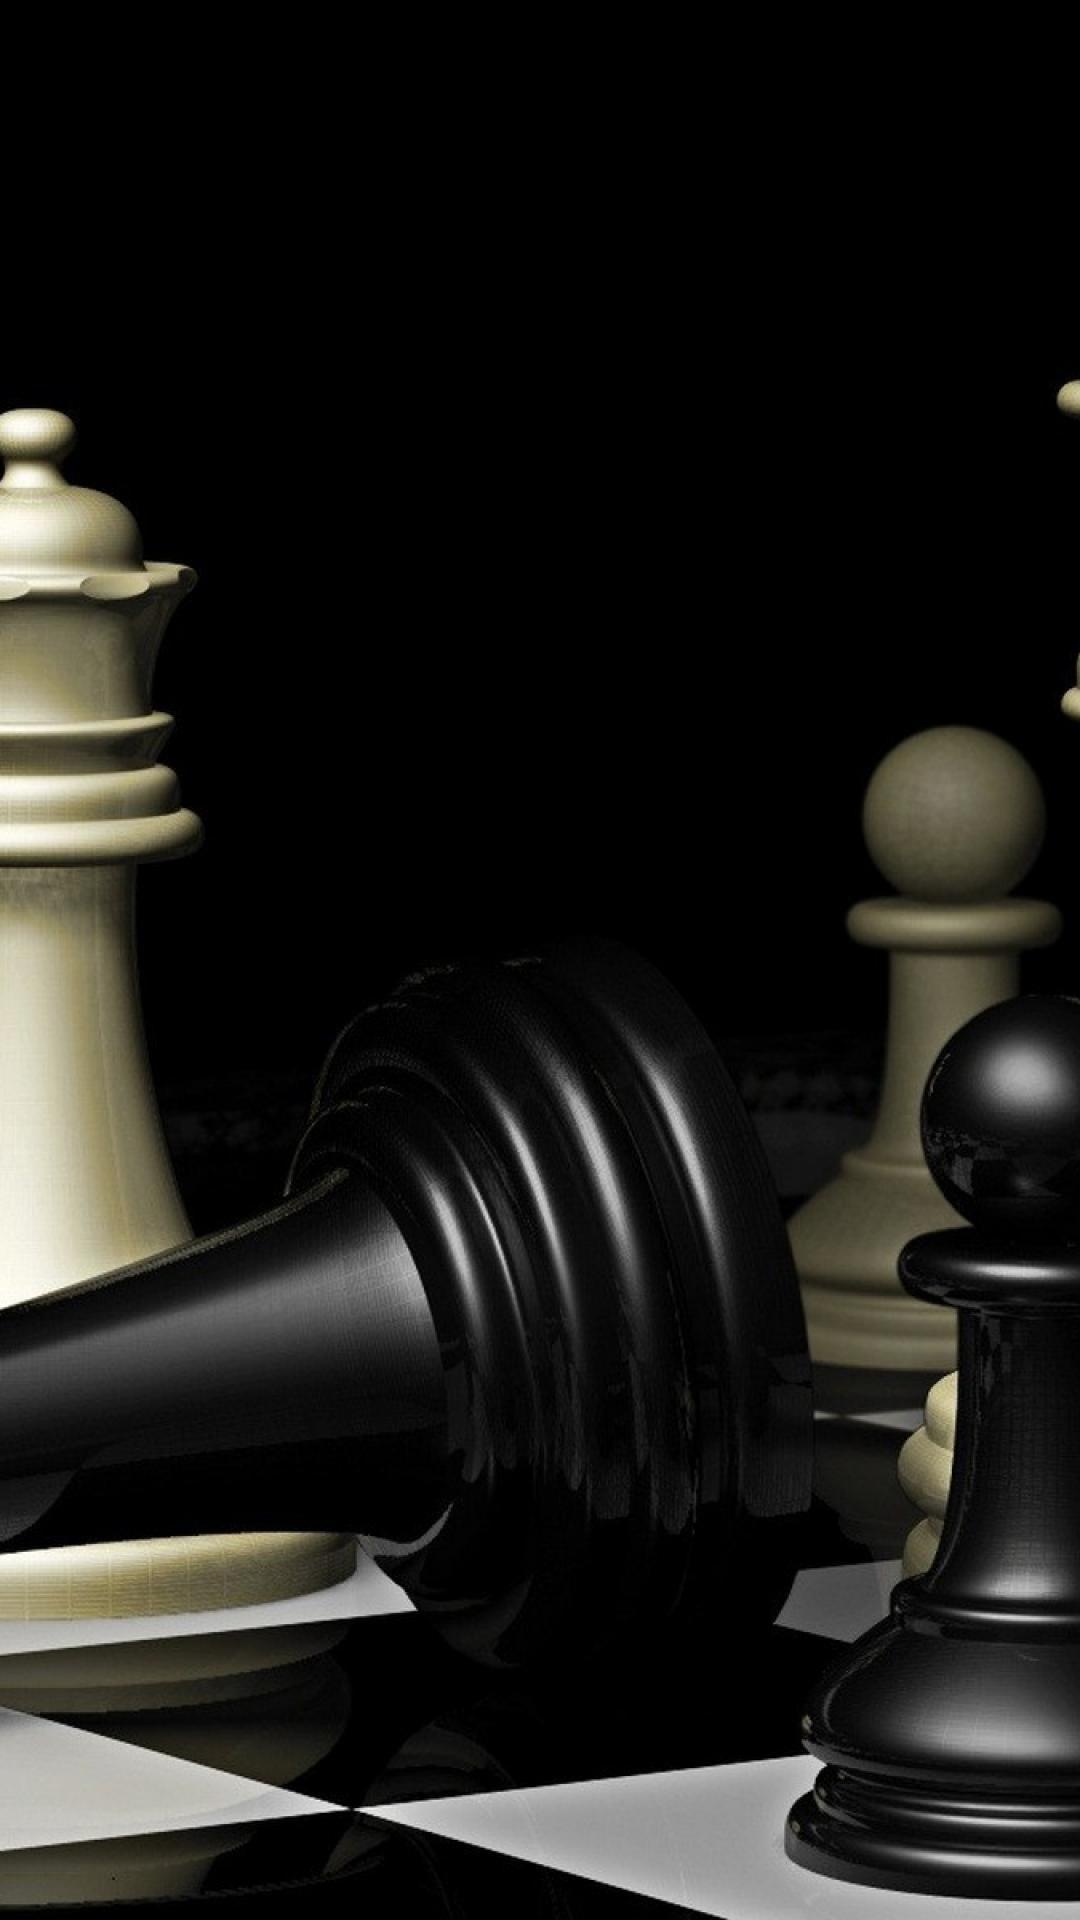 Chess Game iPhone Wallpaper HD - iPhone Wallpapers